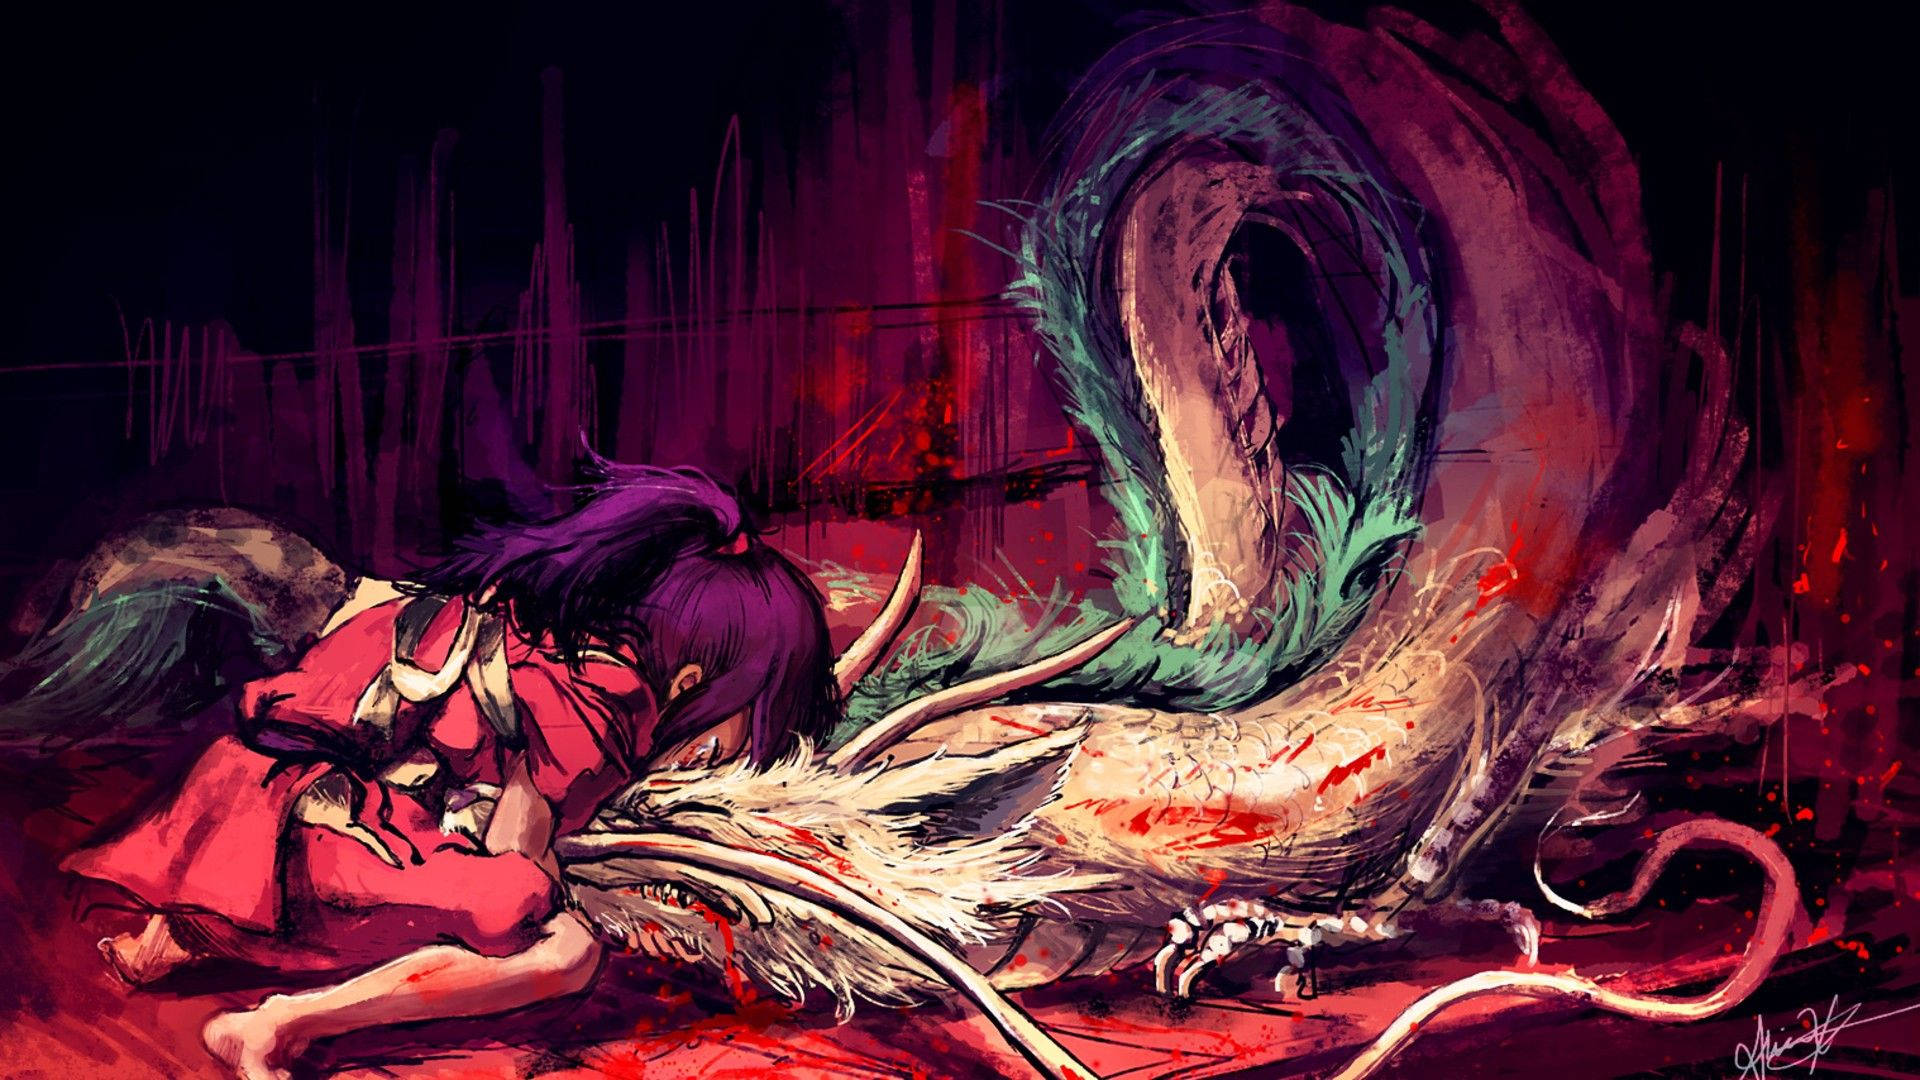 Chihiro and Haku form a strong bond in the magical world of Spirited Away Wallpaper